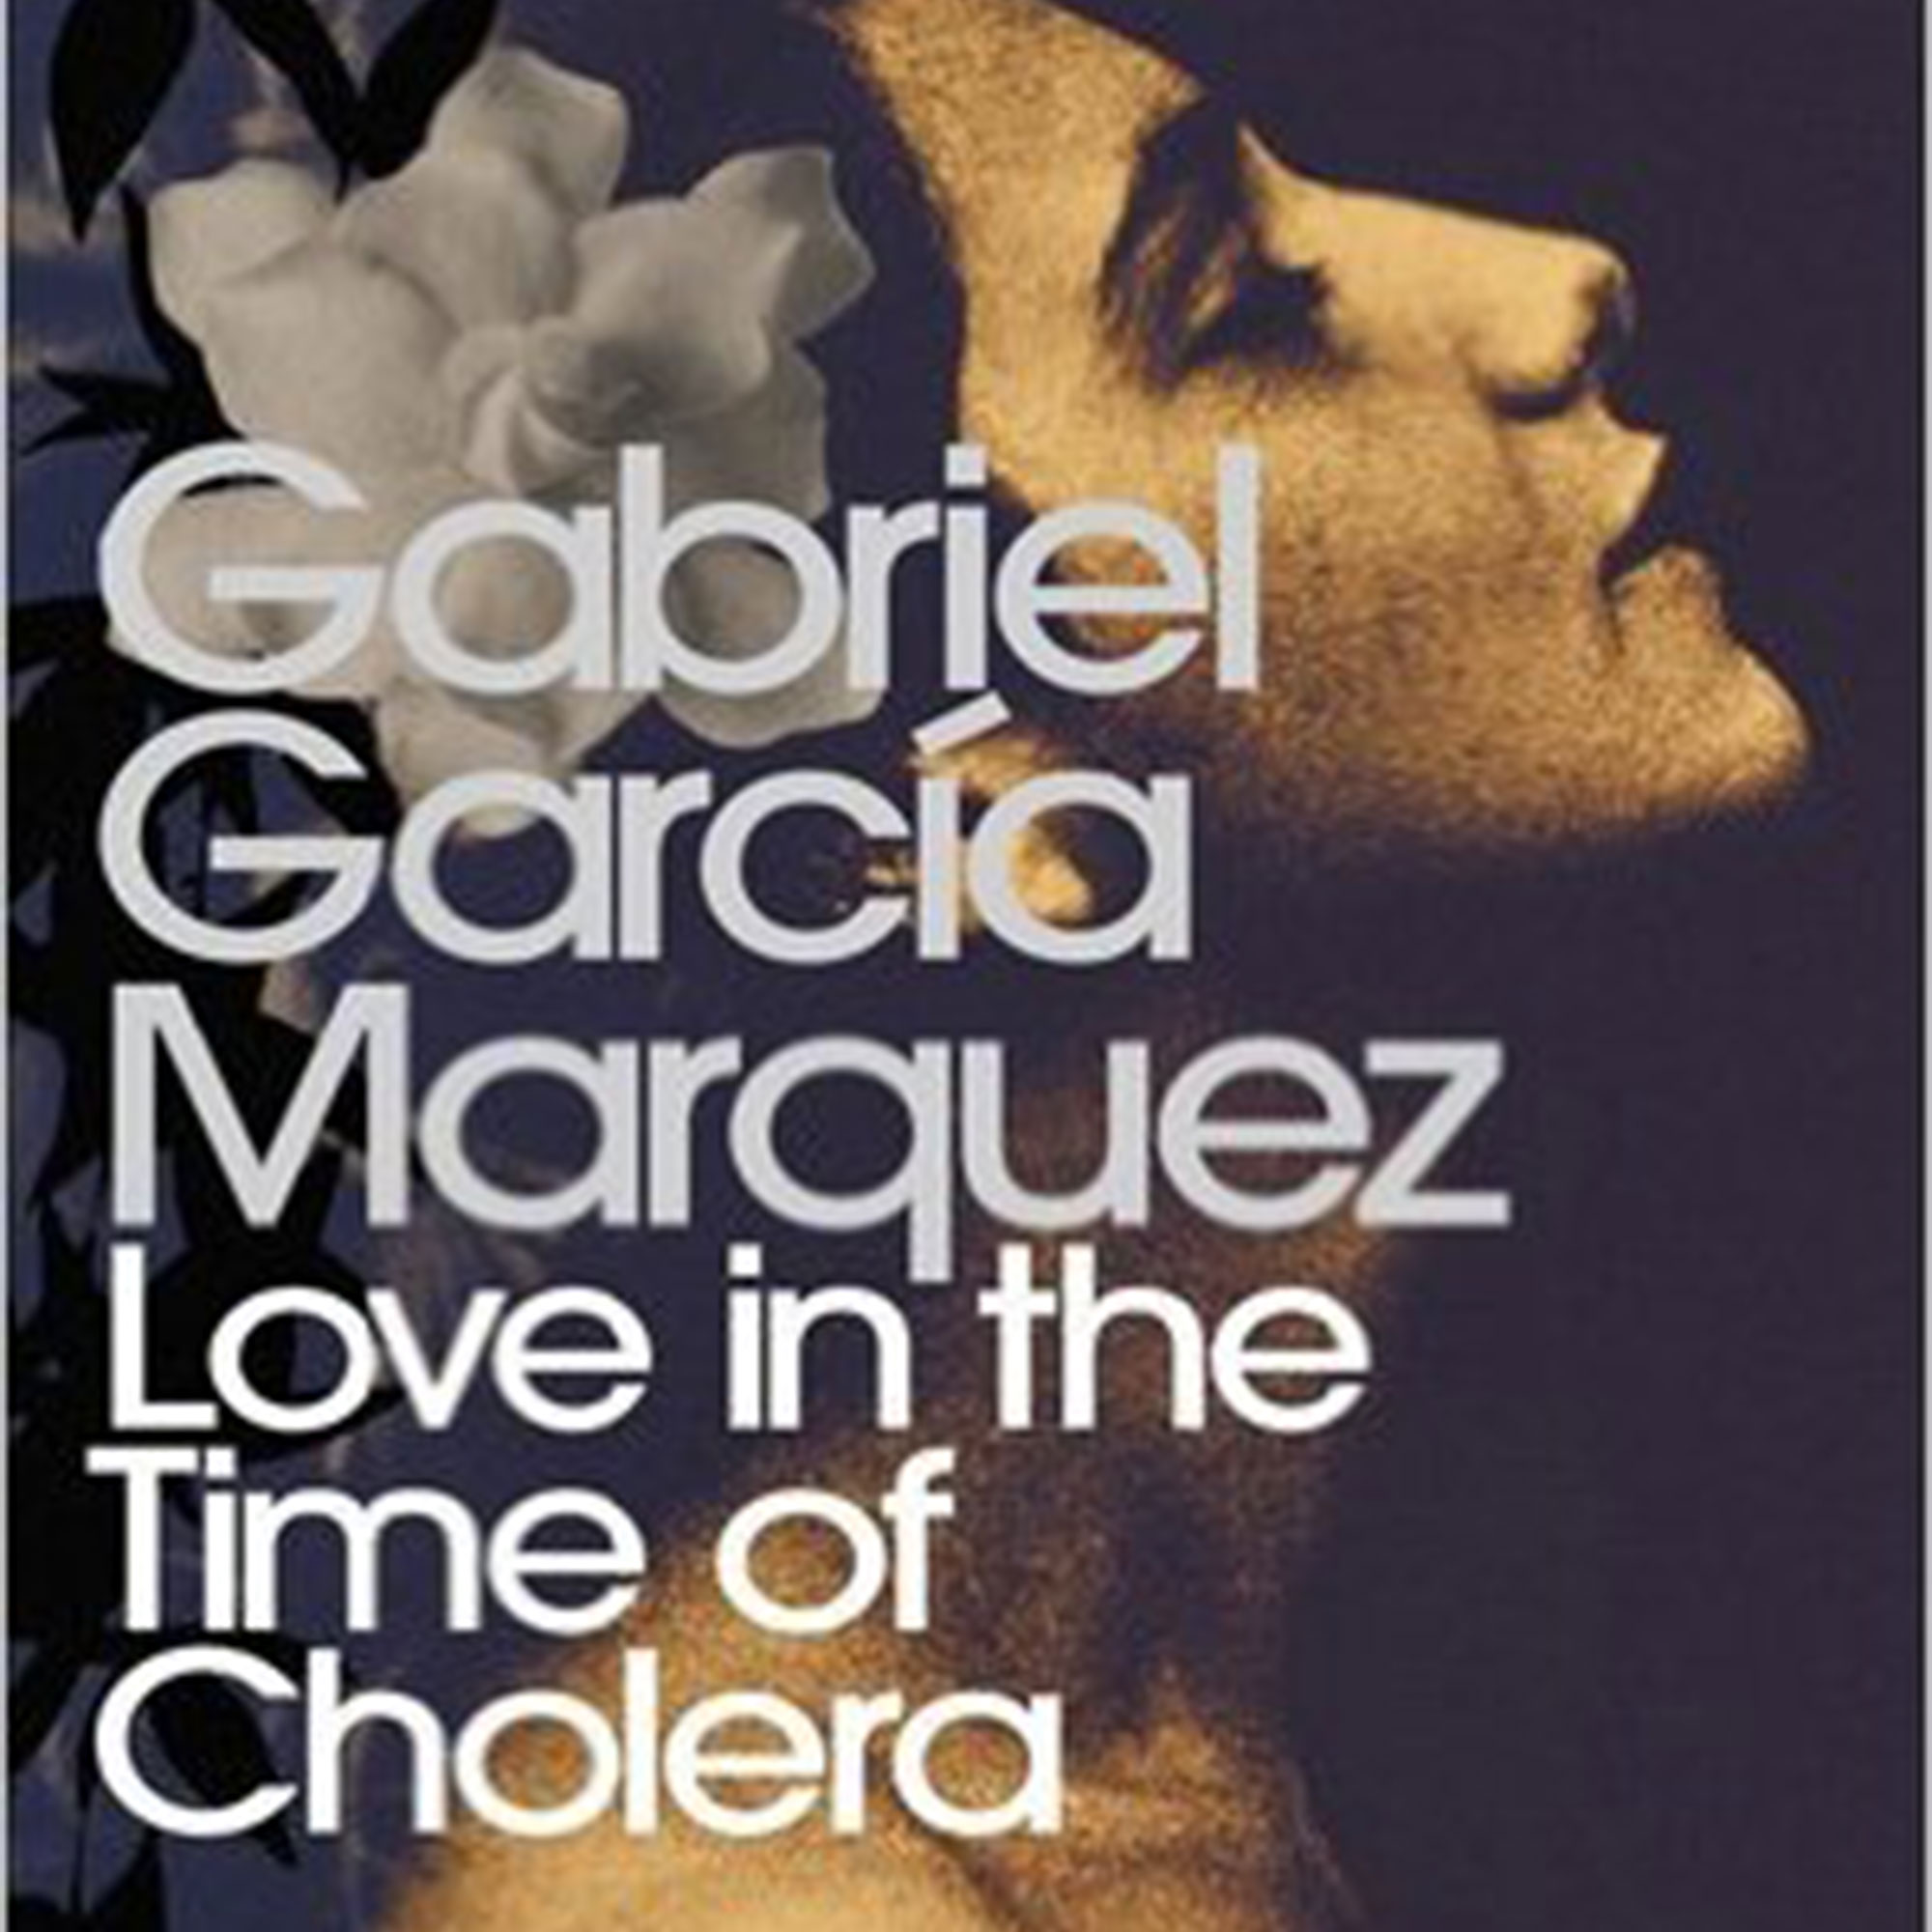 Time of Cholera Gabriel Garc­a Márquez "There is no greater glory than to for love "